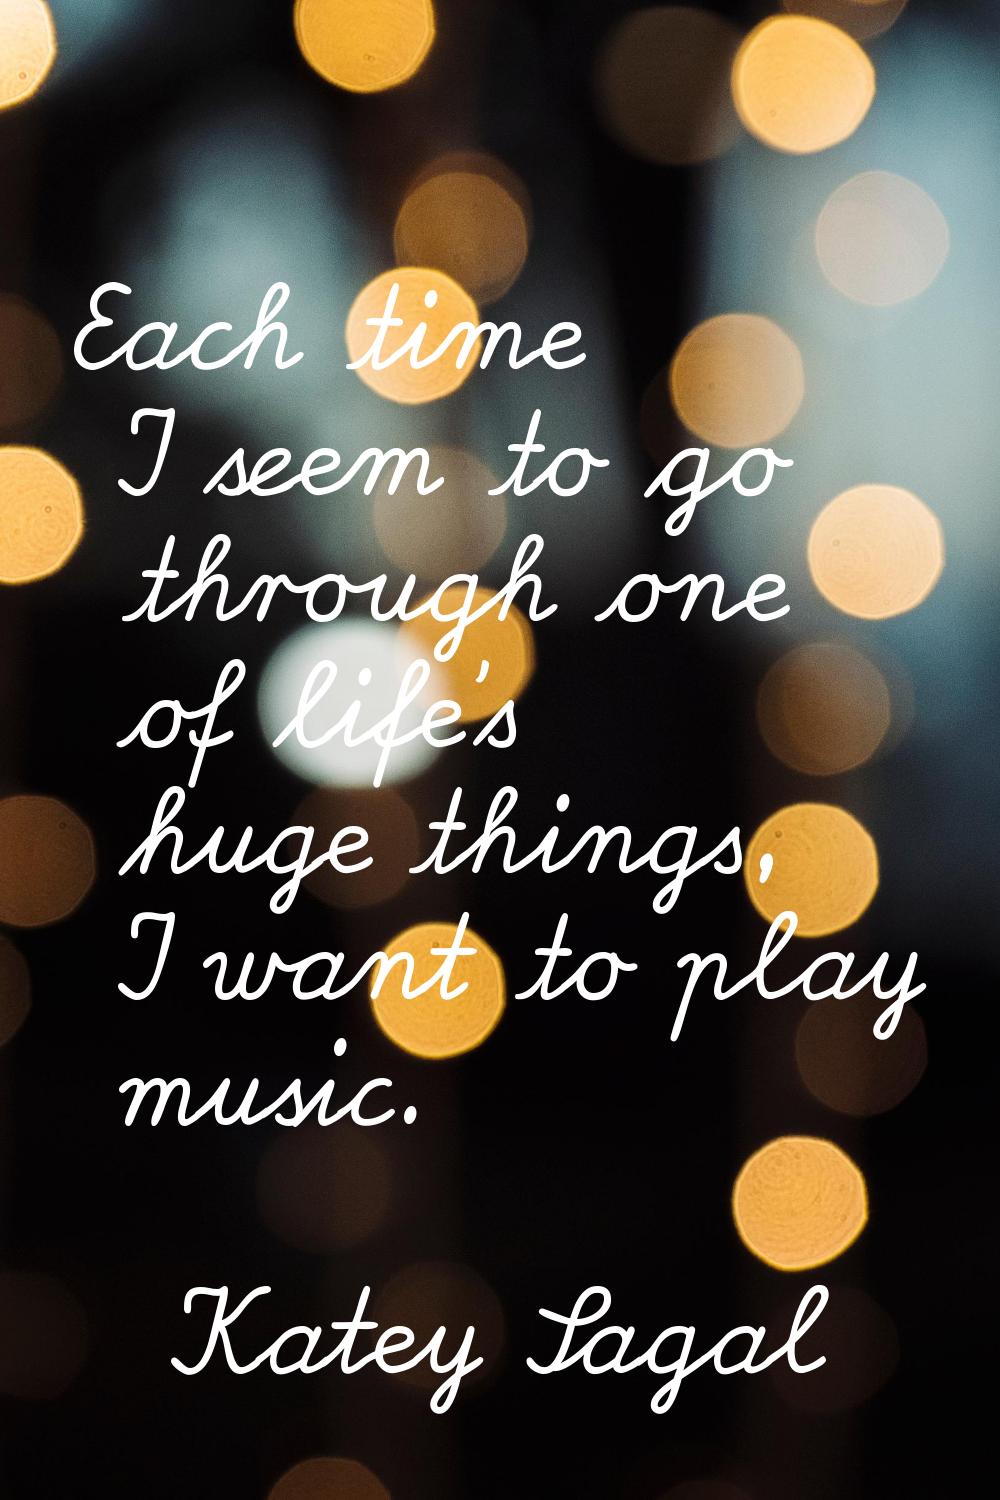 Each time I seem to go through one of life's huge things, I want to play music.